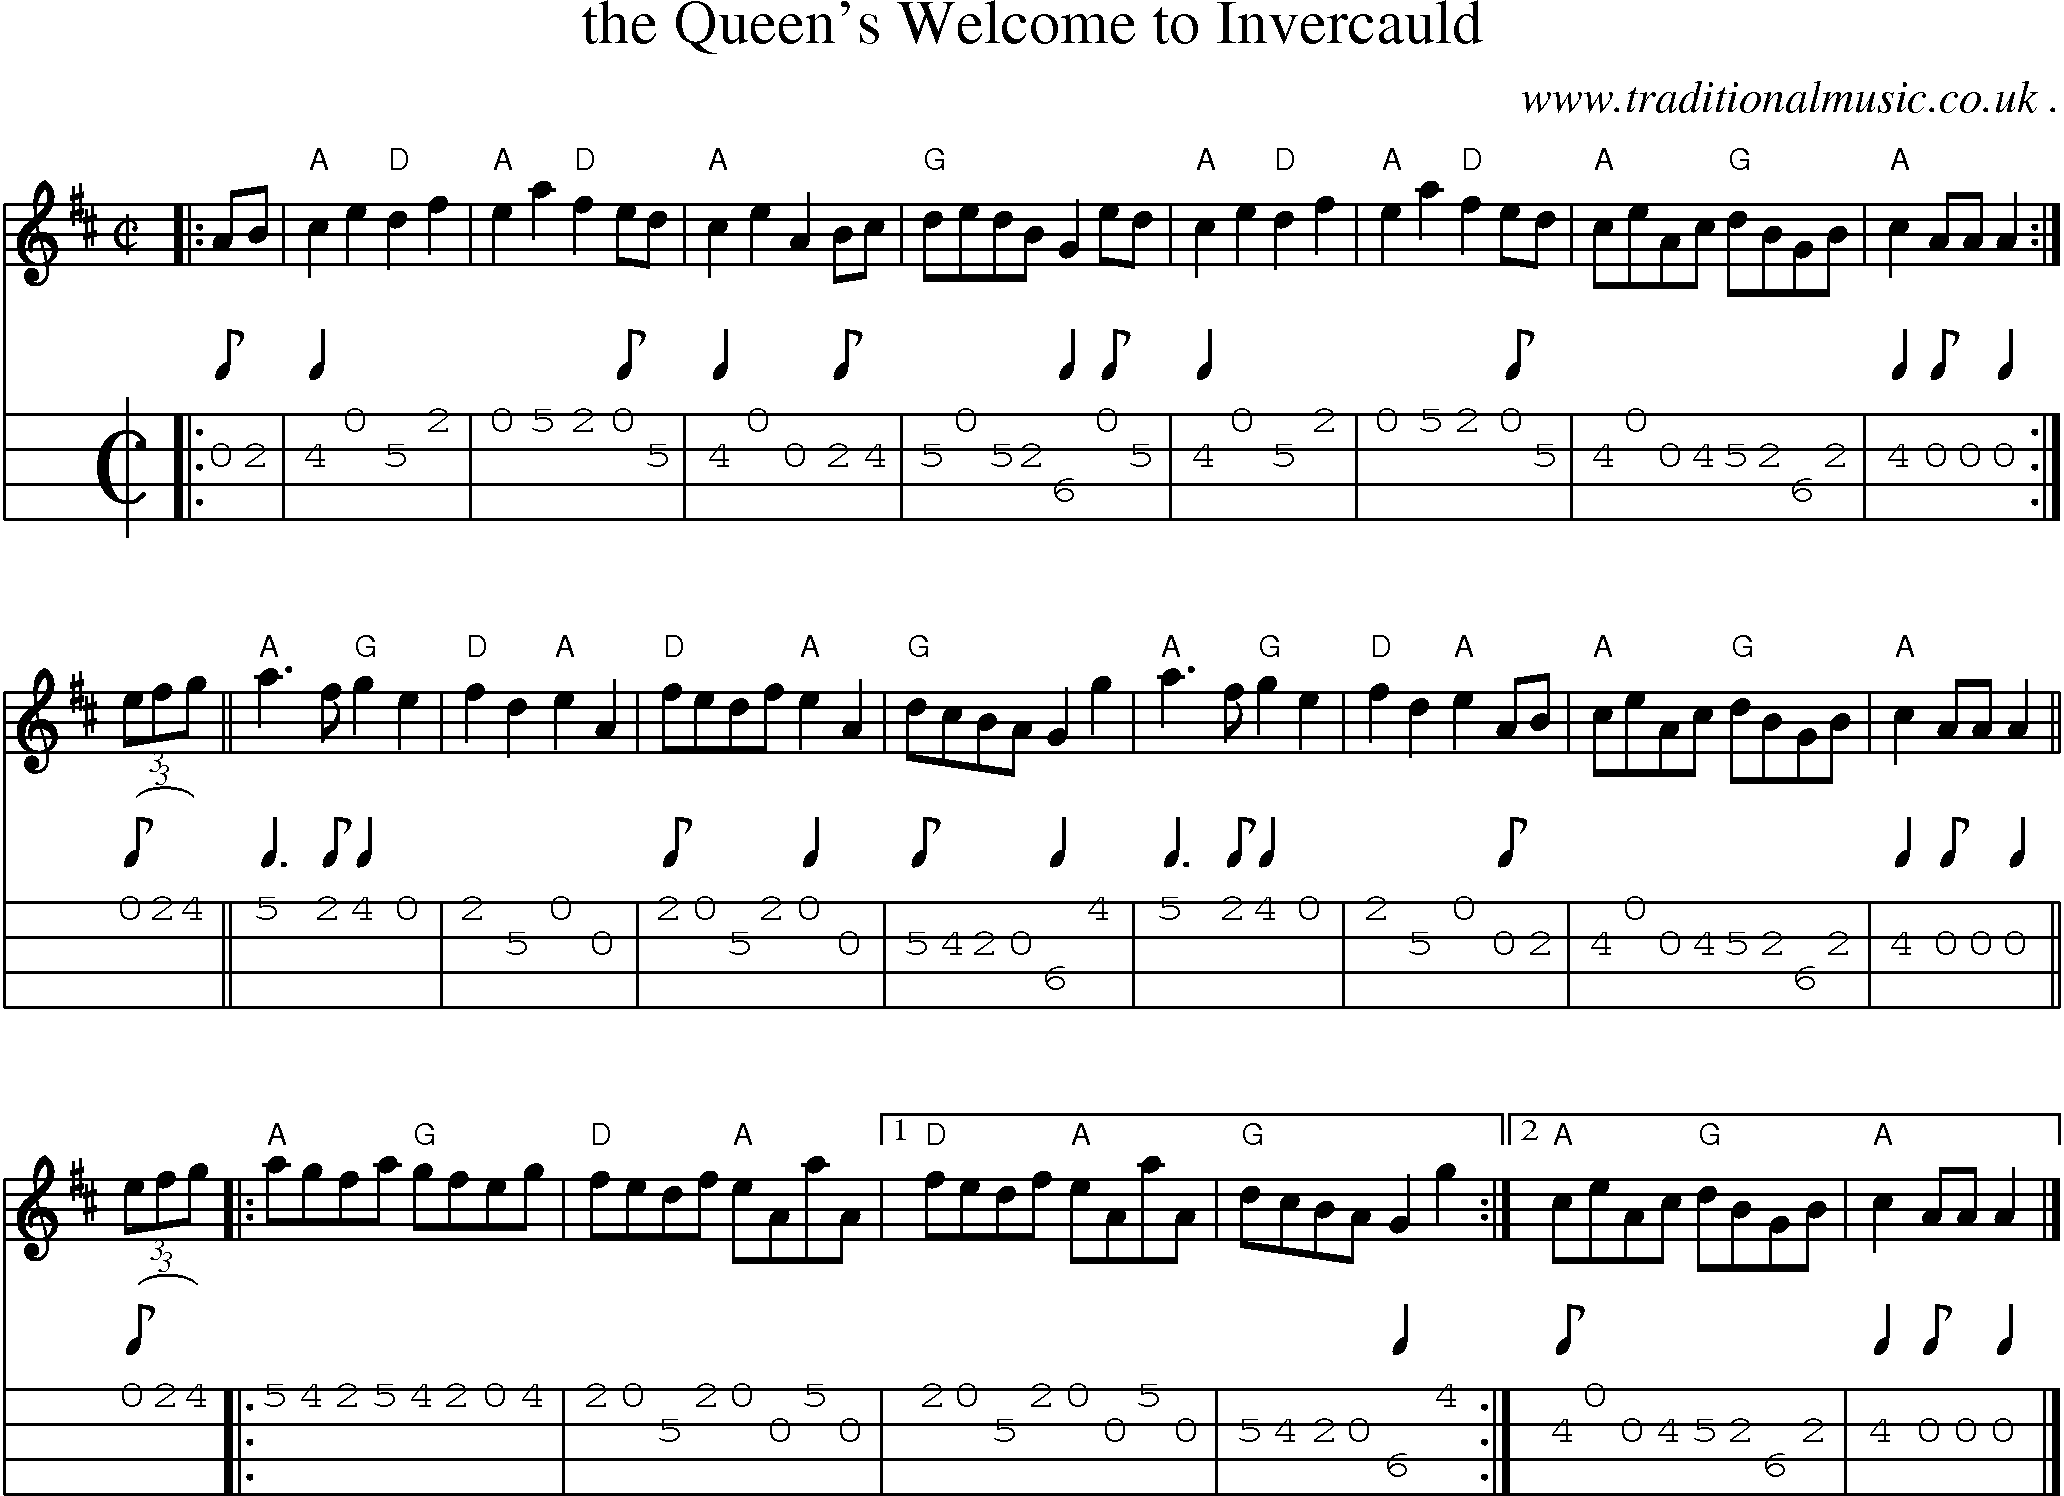 Sheet-music  score, Chords and Mandolin Tabs for The Queens Welcome To Invercauld